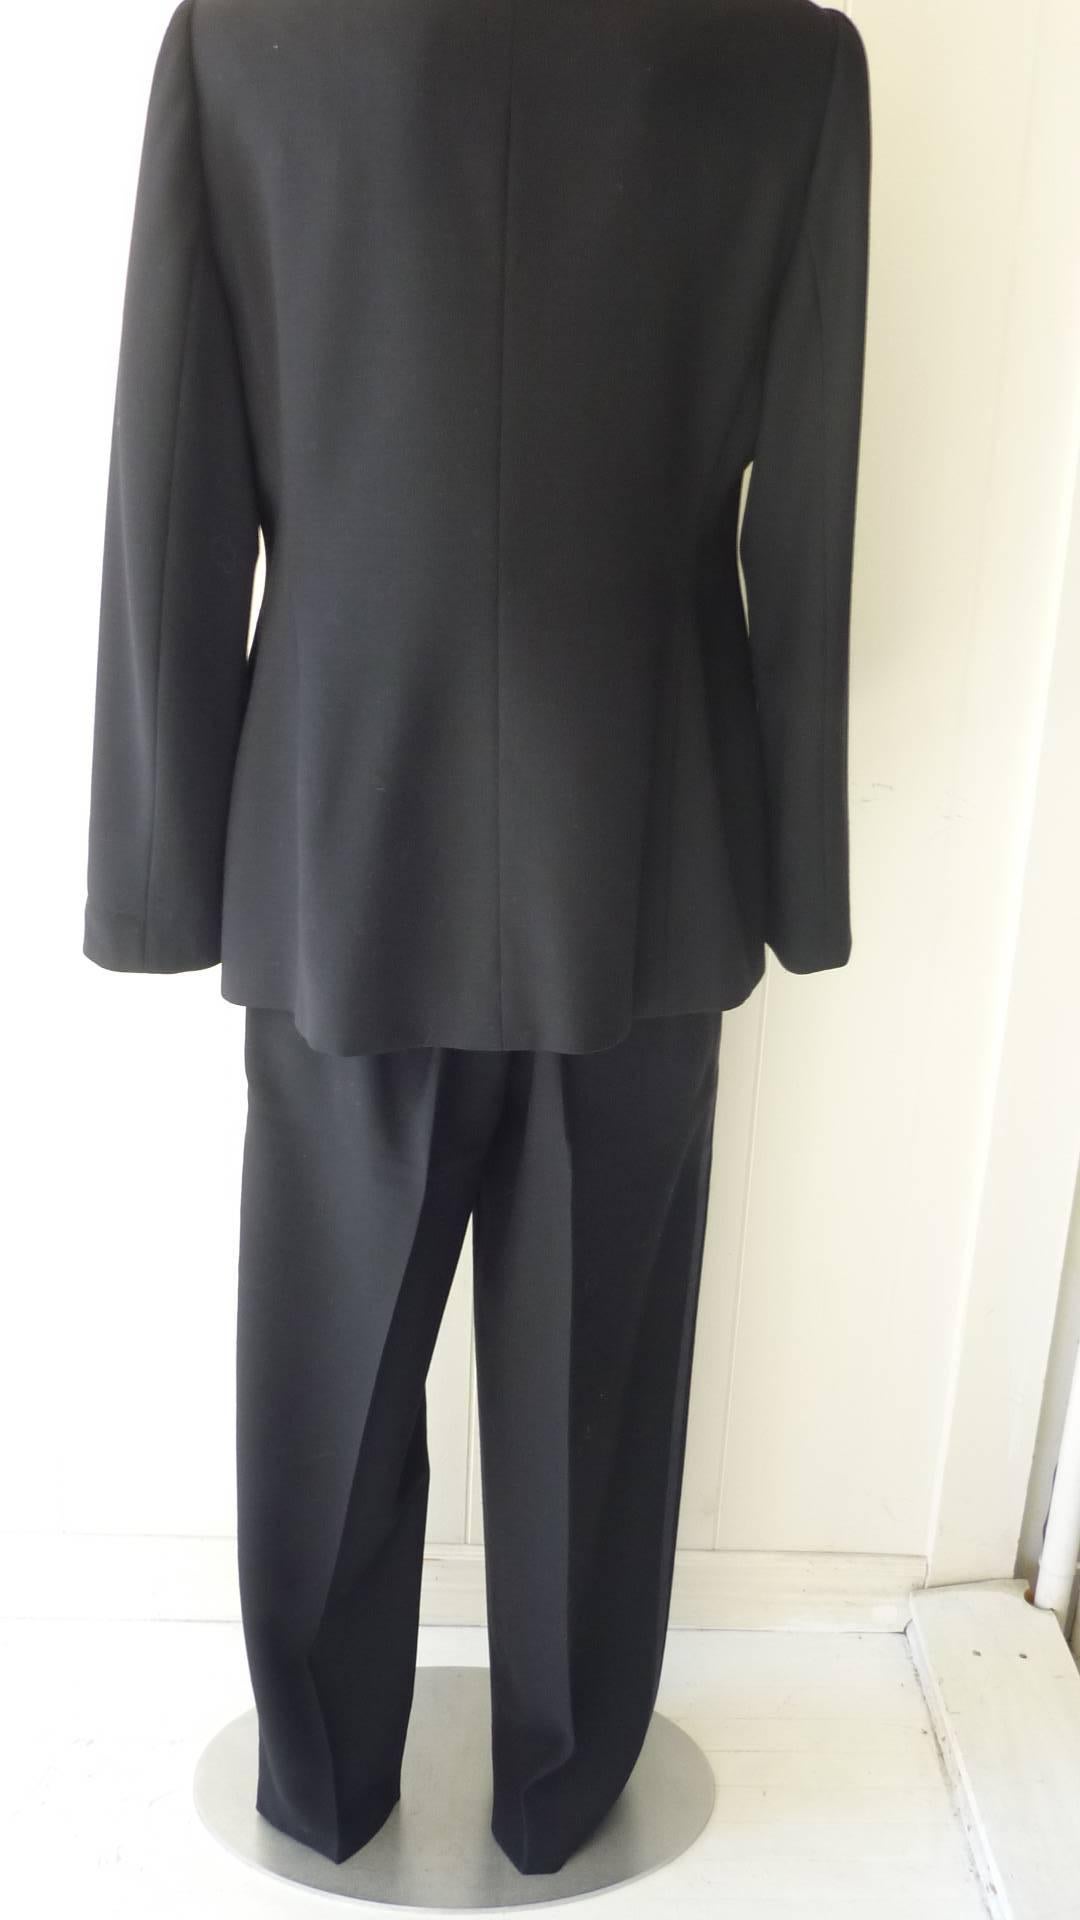 Perfect evening attire, this fine wool tuxedo suit has a satin lapel and stripes down the sides of the pants; slit pockets on the pants. The jacket has a one covered button closure and two fake slit pockets.

Measurements are as